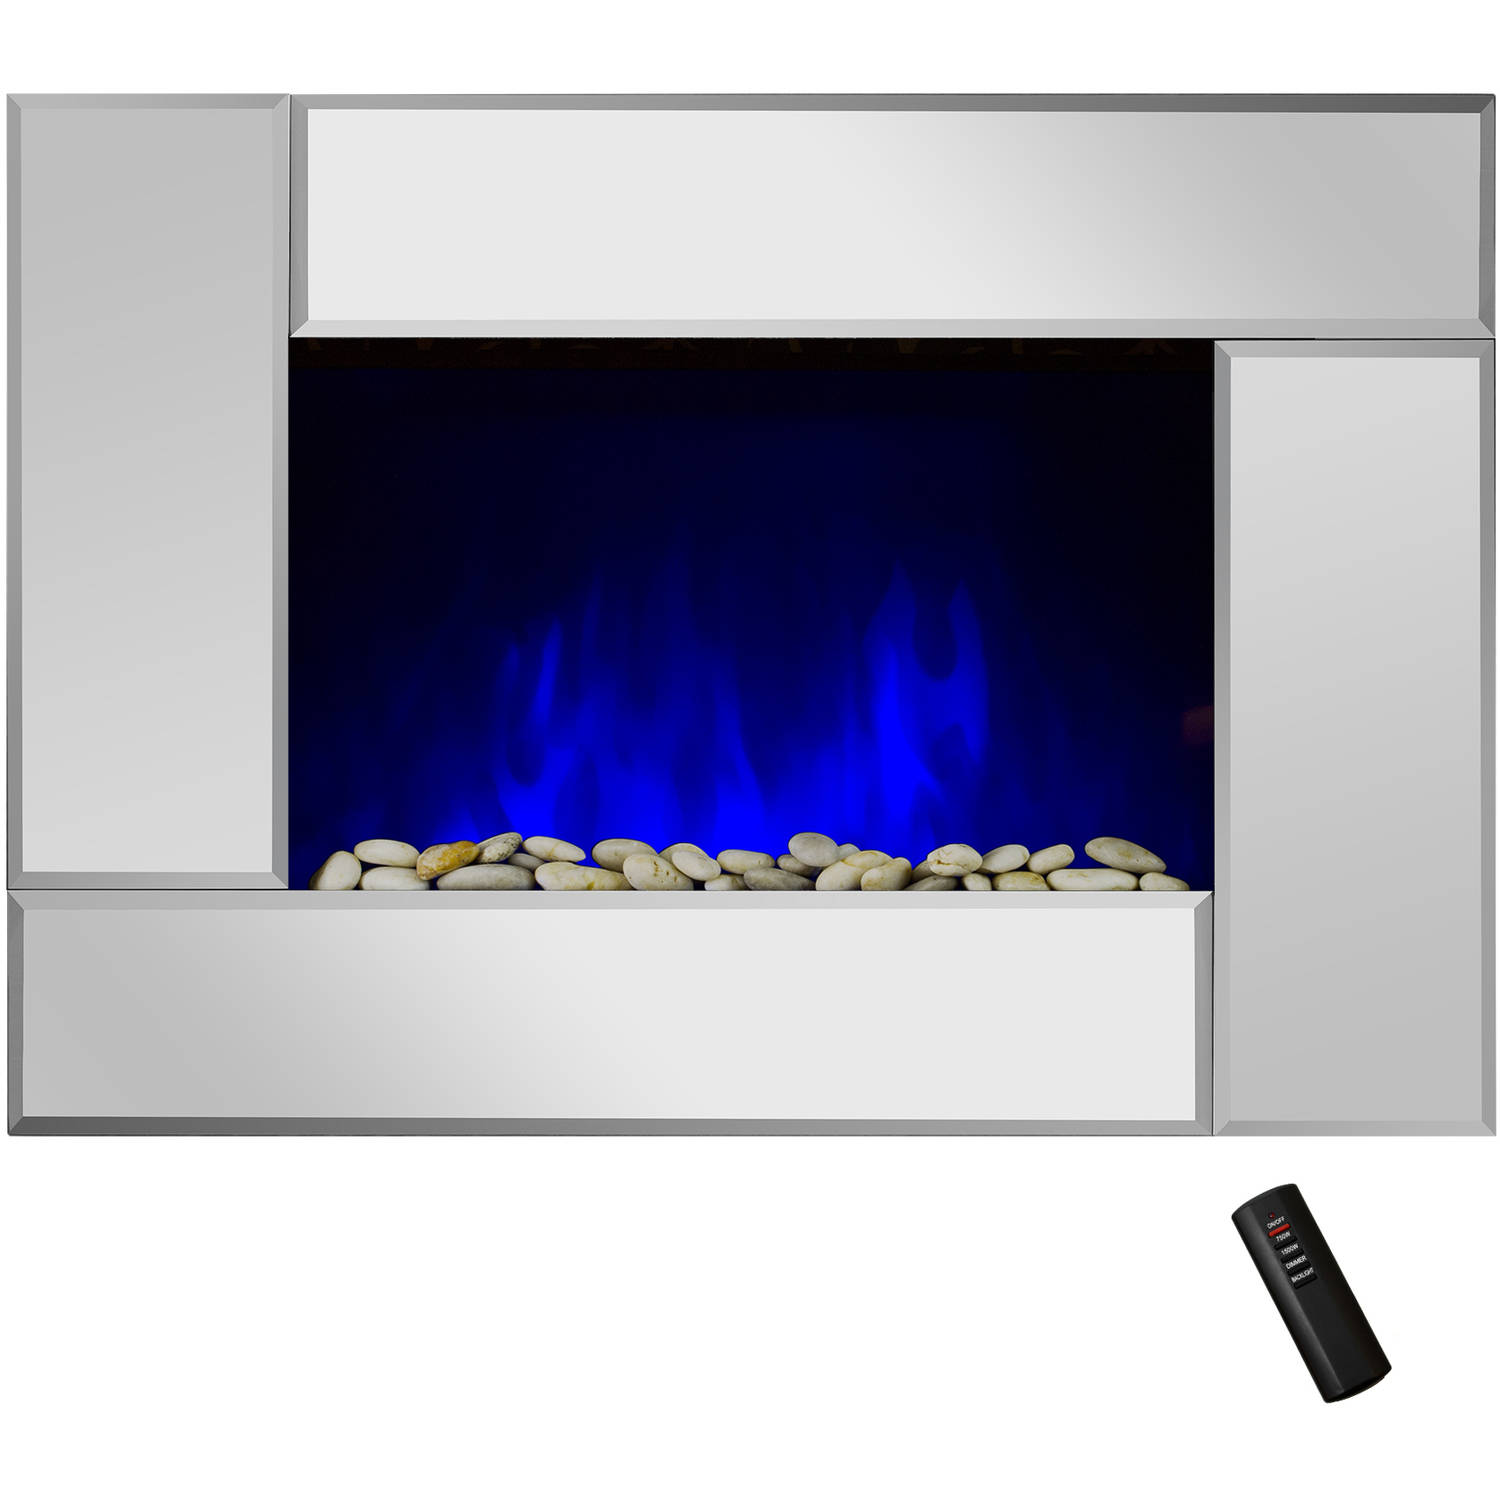 AKDY FP0050 36" 1500W Wall Mount Electric Fireplace Heater with Tempered Glass, Pebbles, Logs and Remote Control, Mirror - image 5 of 14